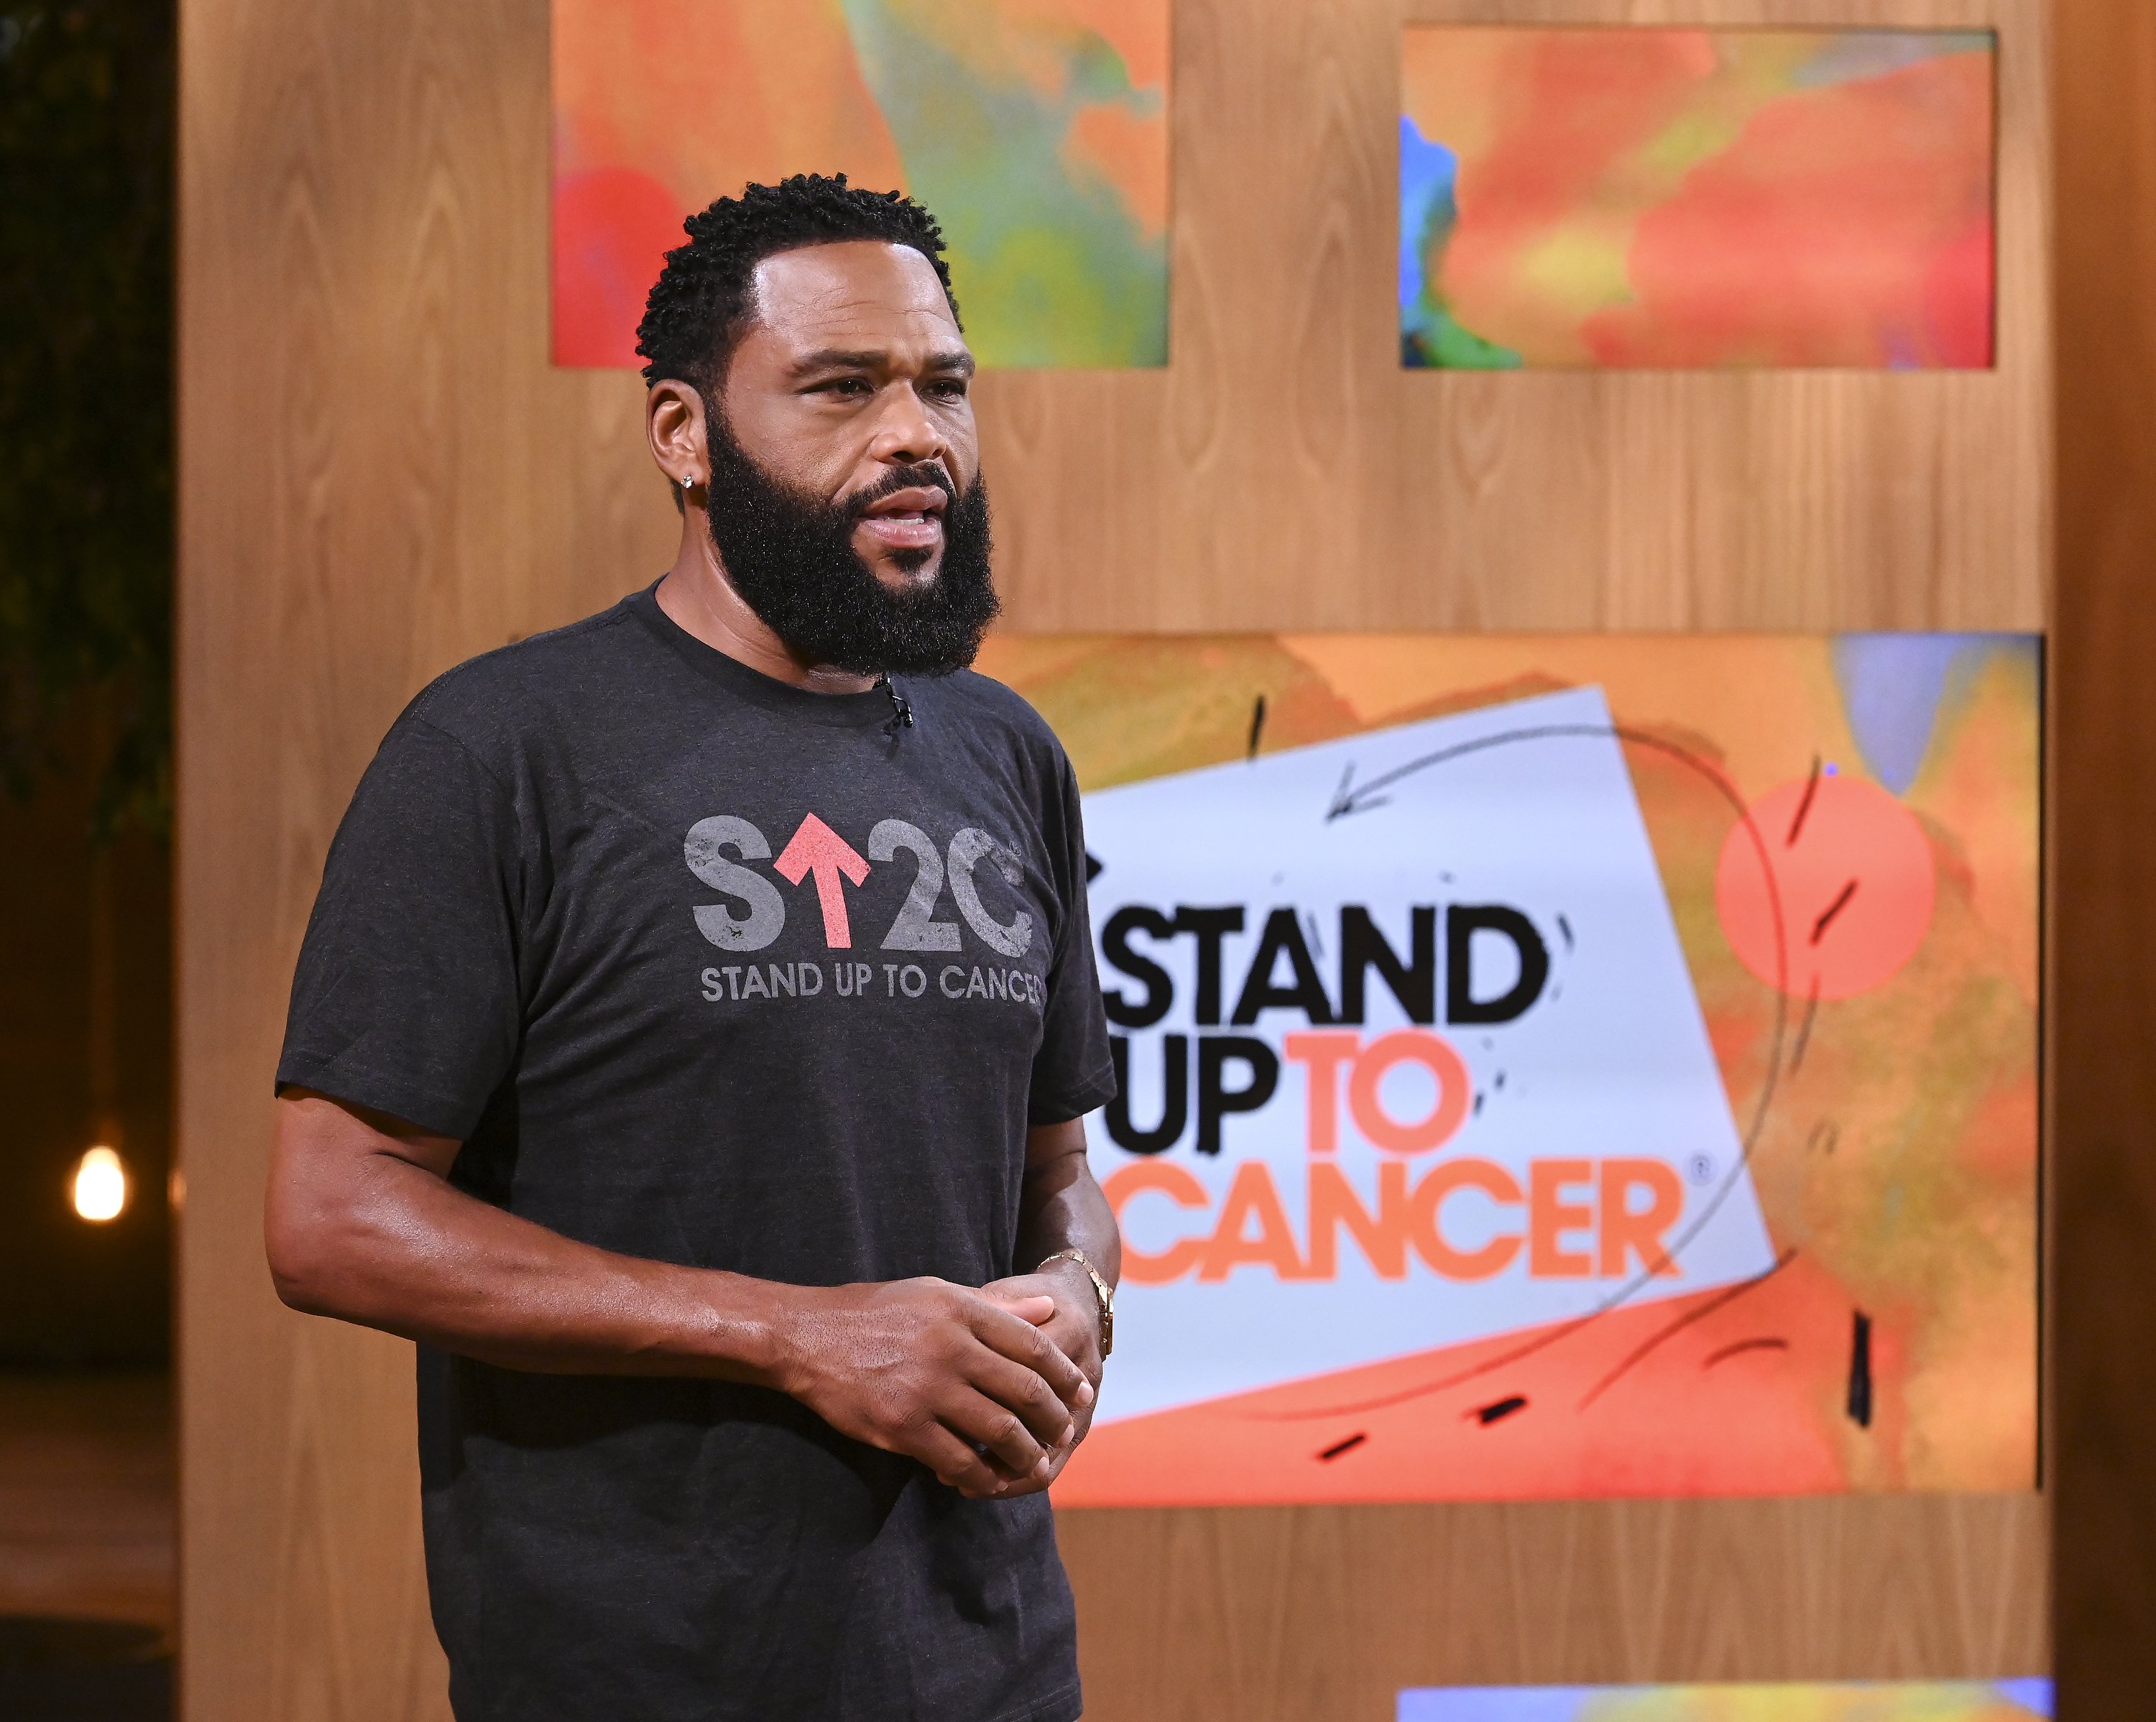 "Black-ish" actor Anthony Anderson, one of the co-hosts of "Stand Up To Cancer," during the televised event | Photo: ABC via Getty Images